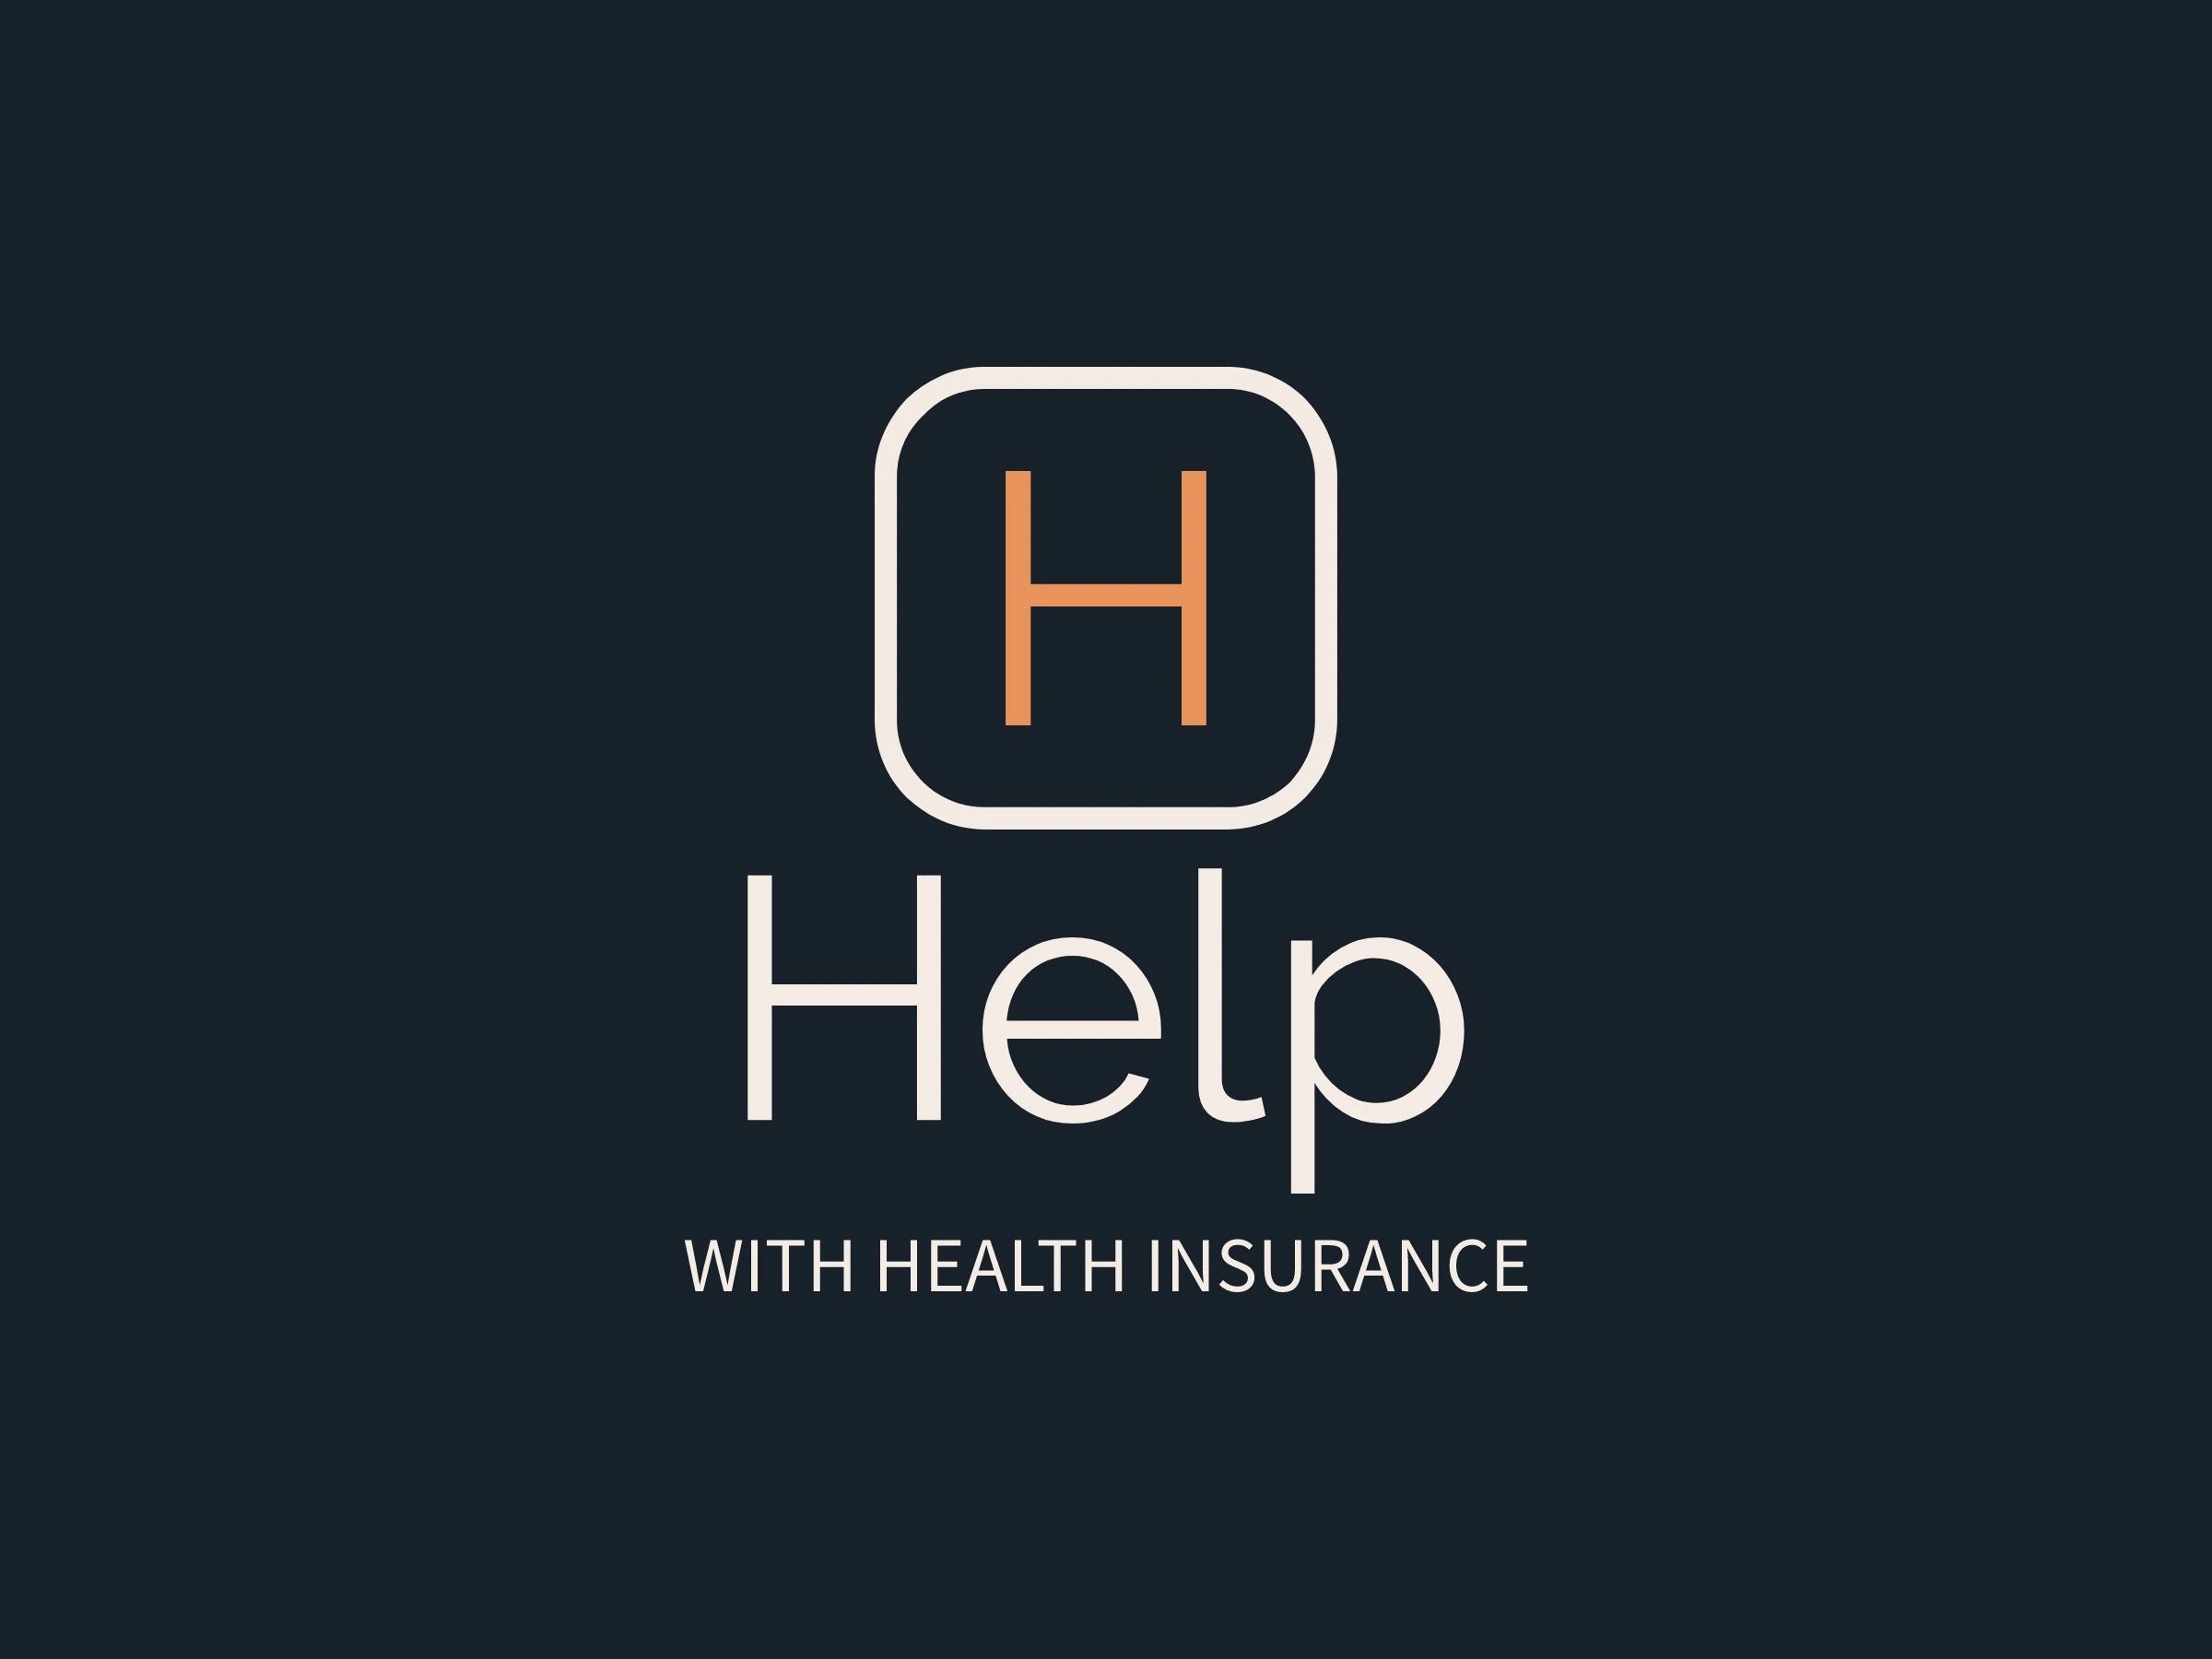 Help with Health Insurance 
Affordable Care act
Arizona Health Insurance
Marketplace 
Healthcare.gov